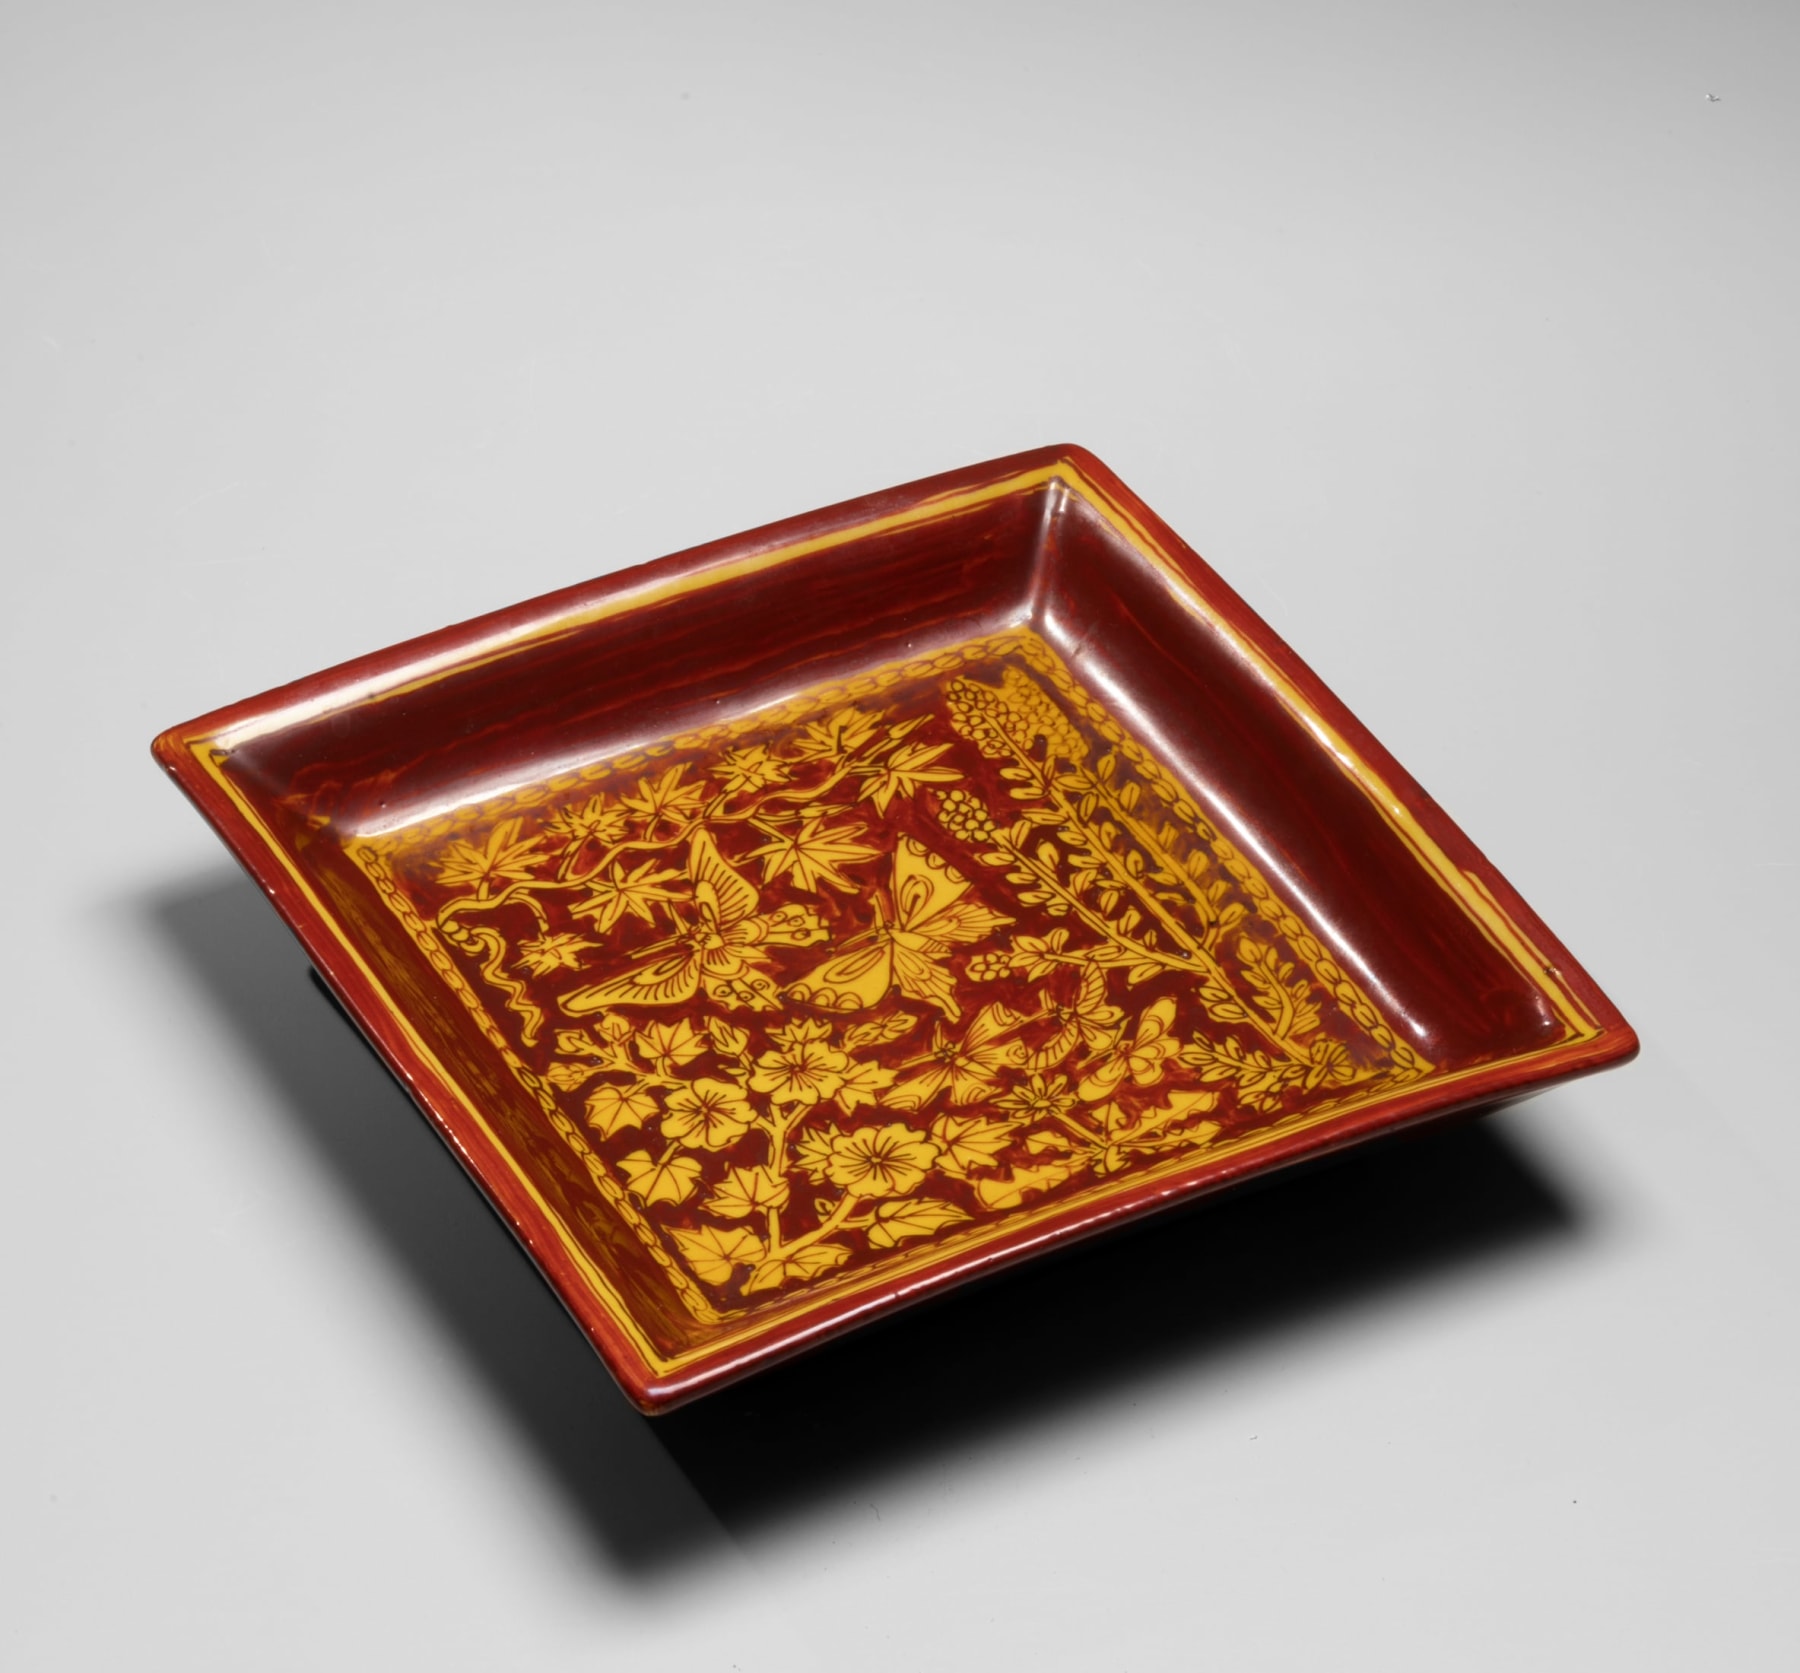 Katō Hajime (1900-1968), Chinese-style square plate with red and yellow glazing